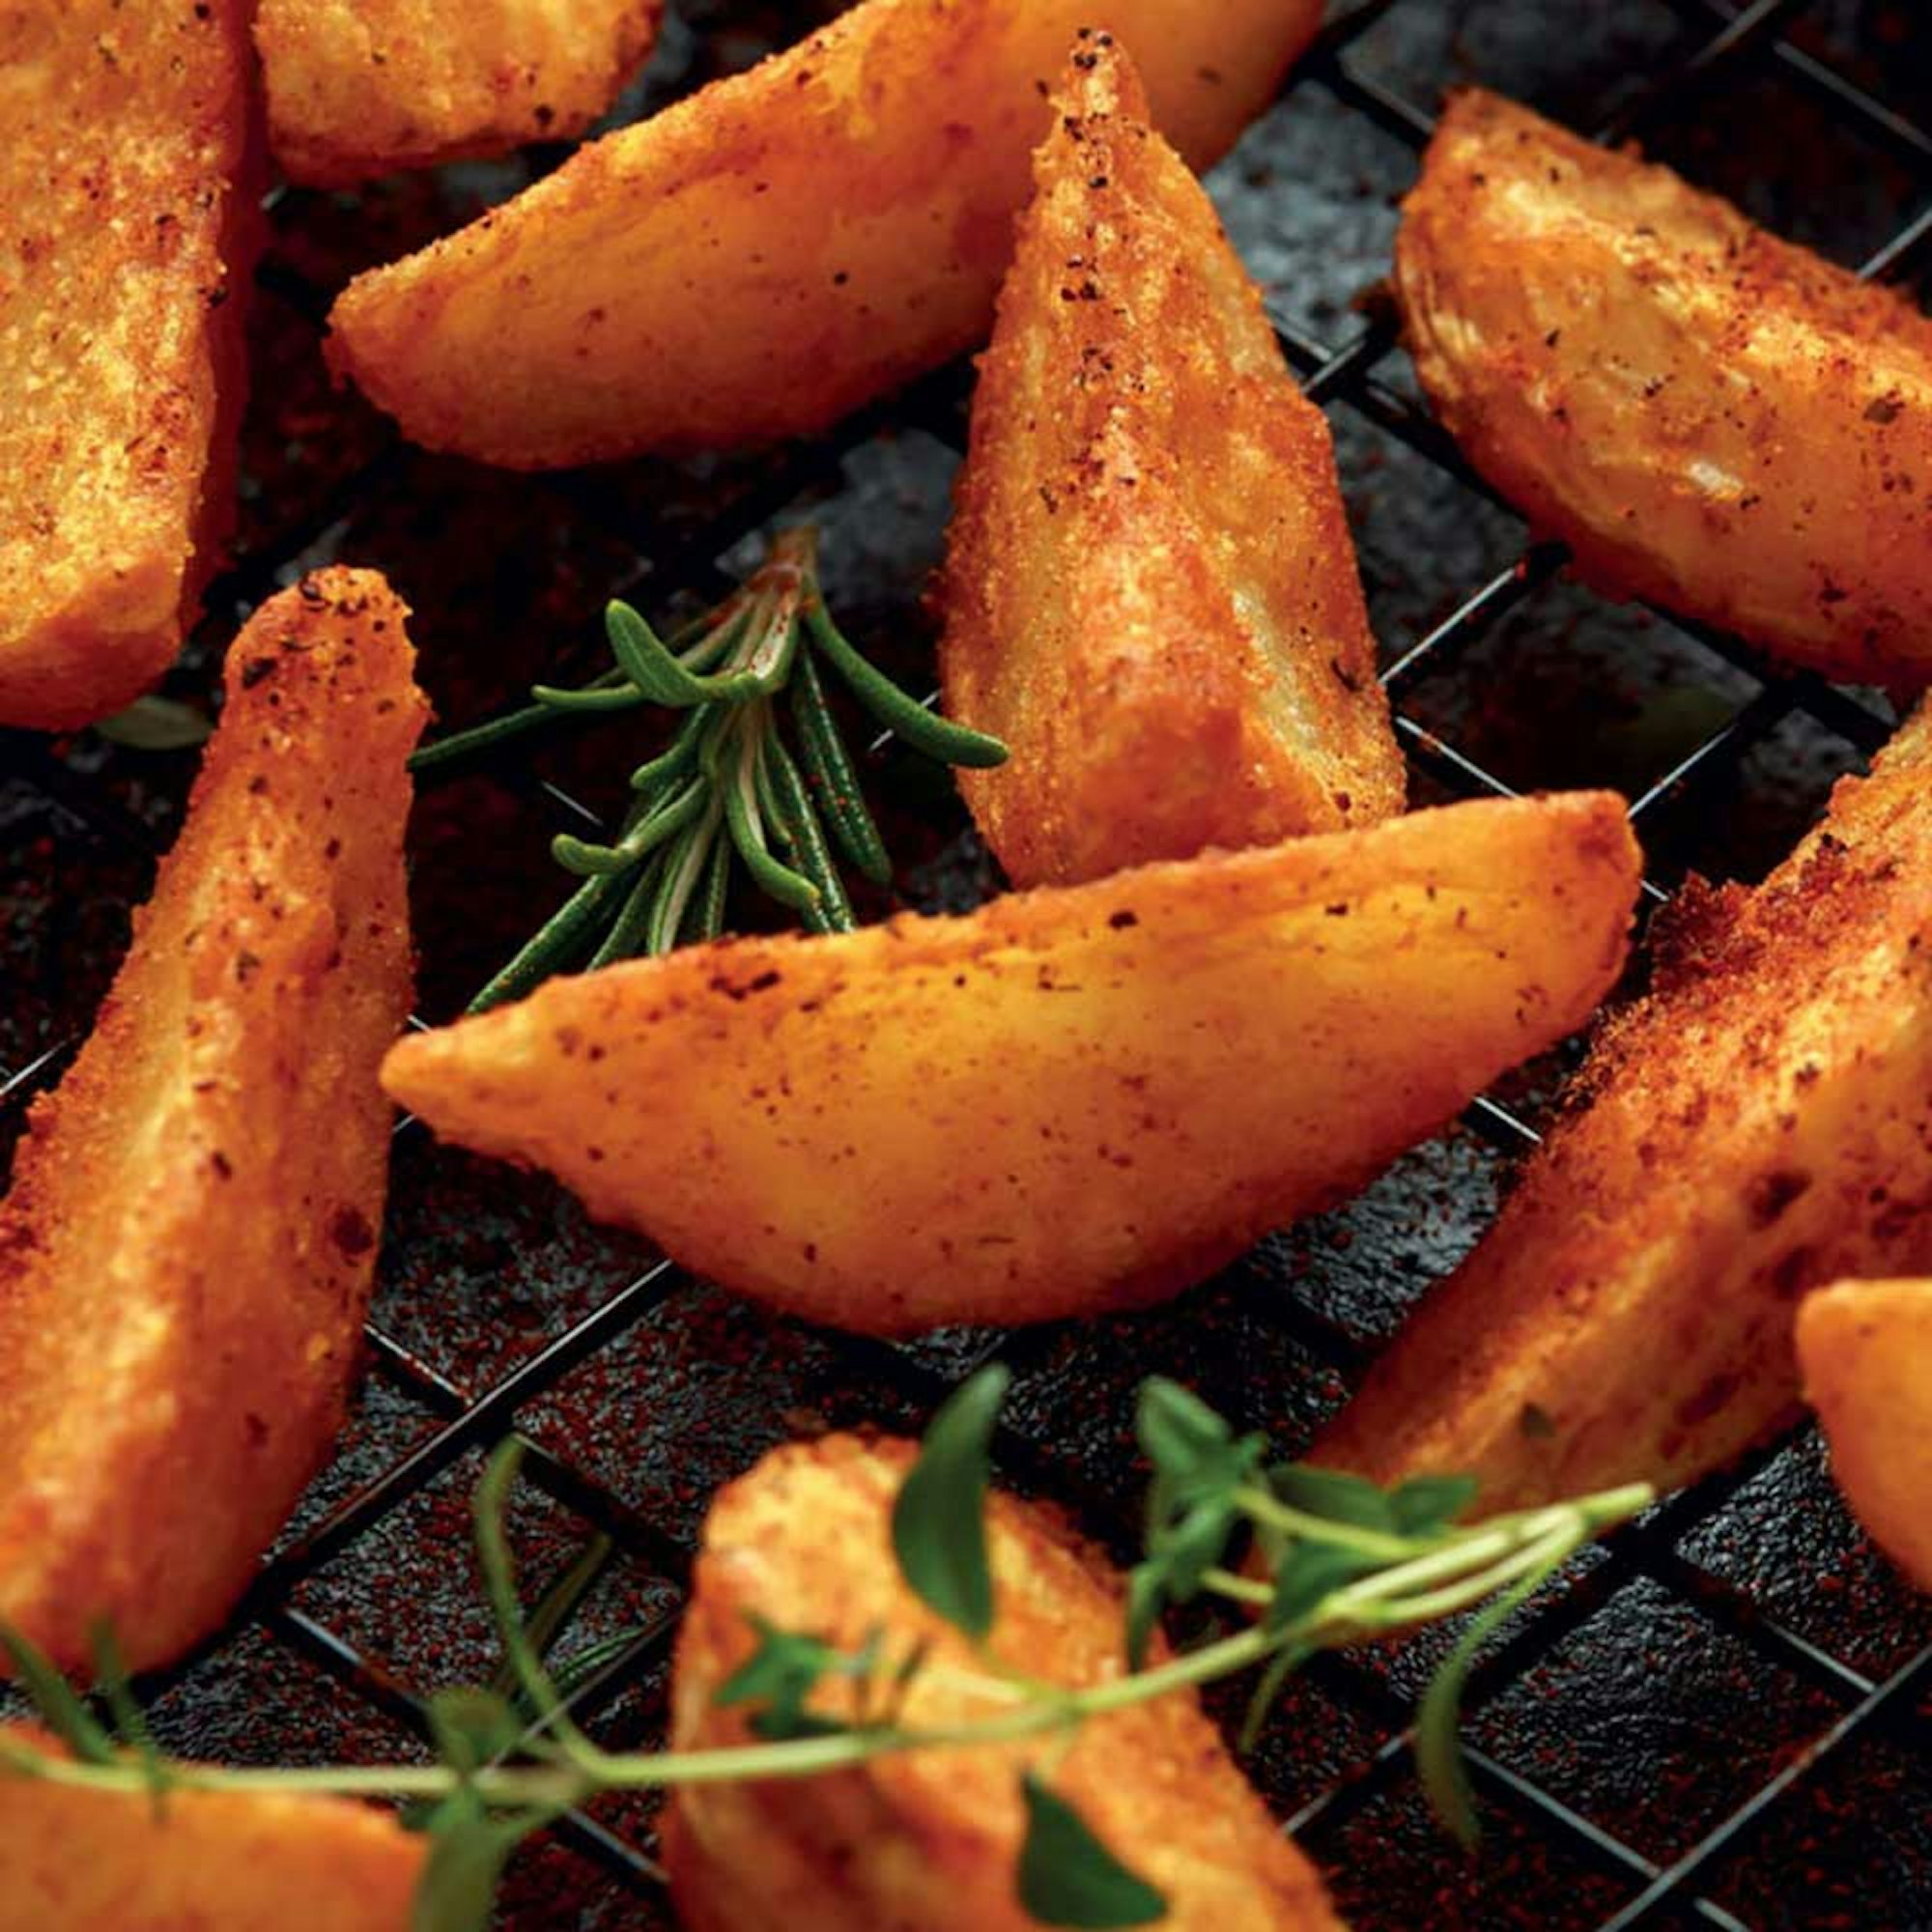 Air Fryer Potato Wedges recipe. Baccarat The Healthy Fry Multi Dual Zone 9L Air Fryer.